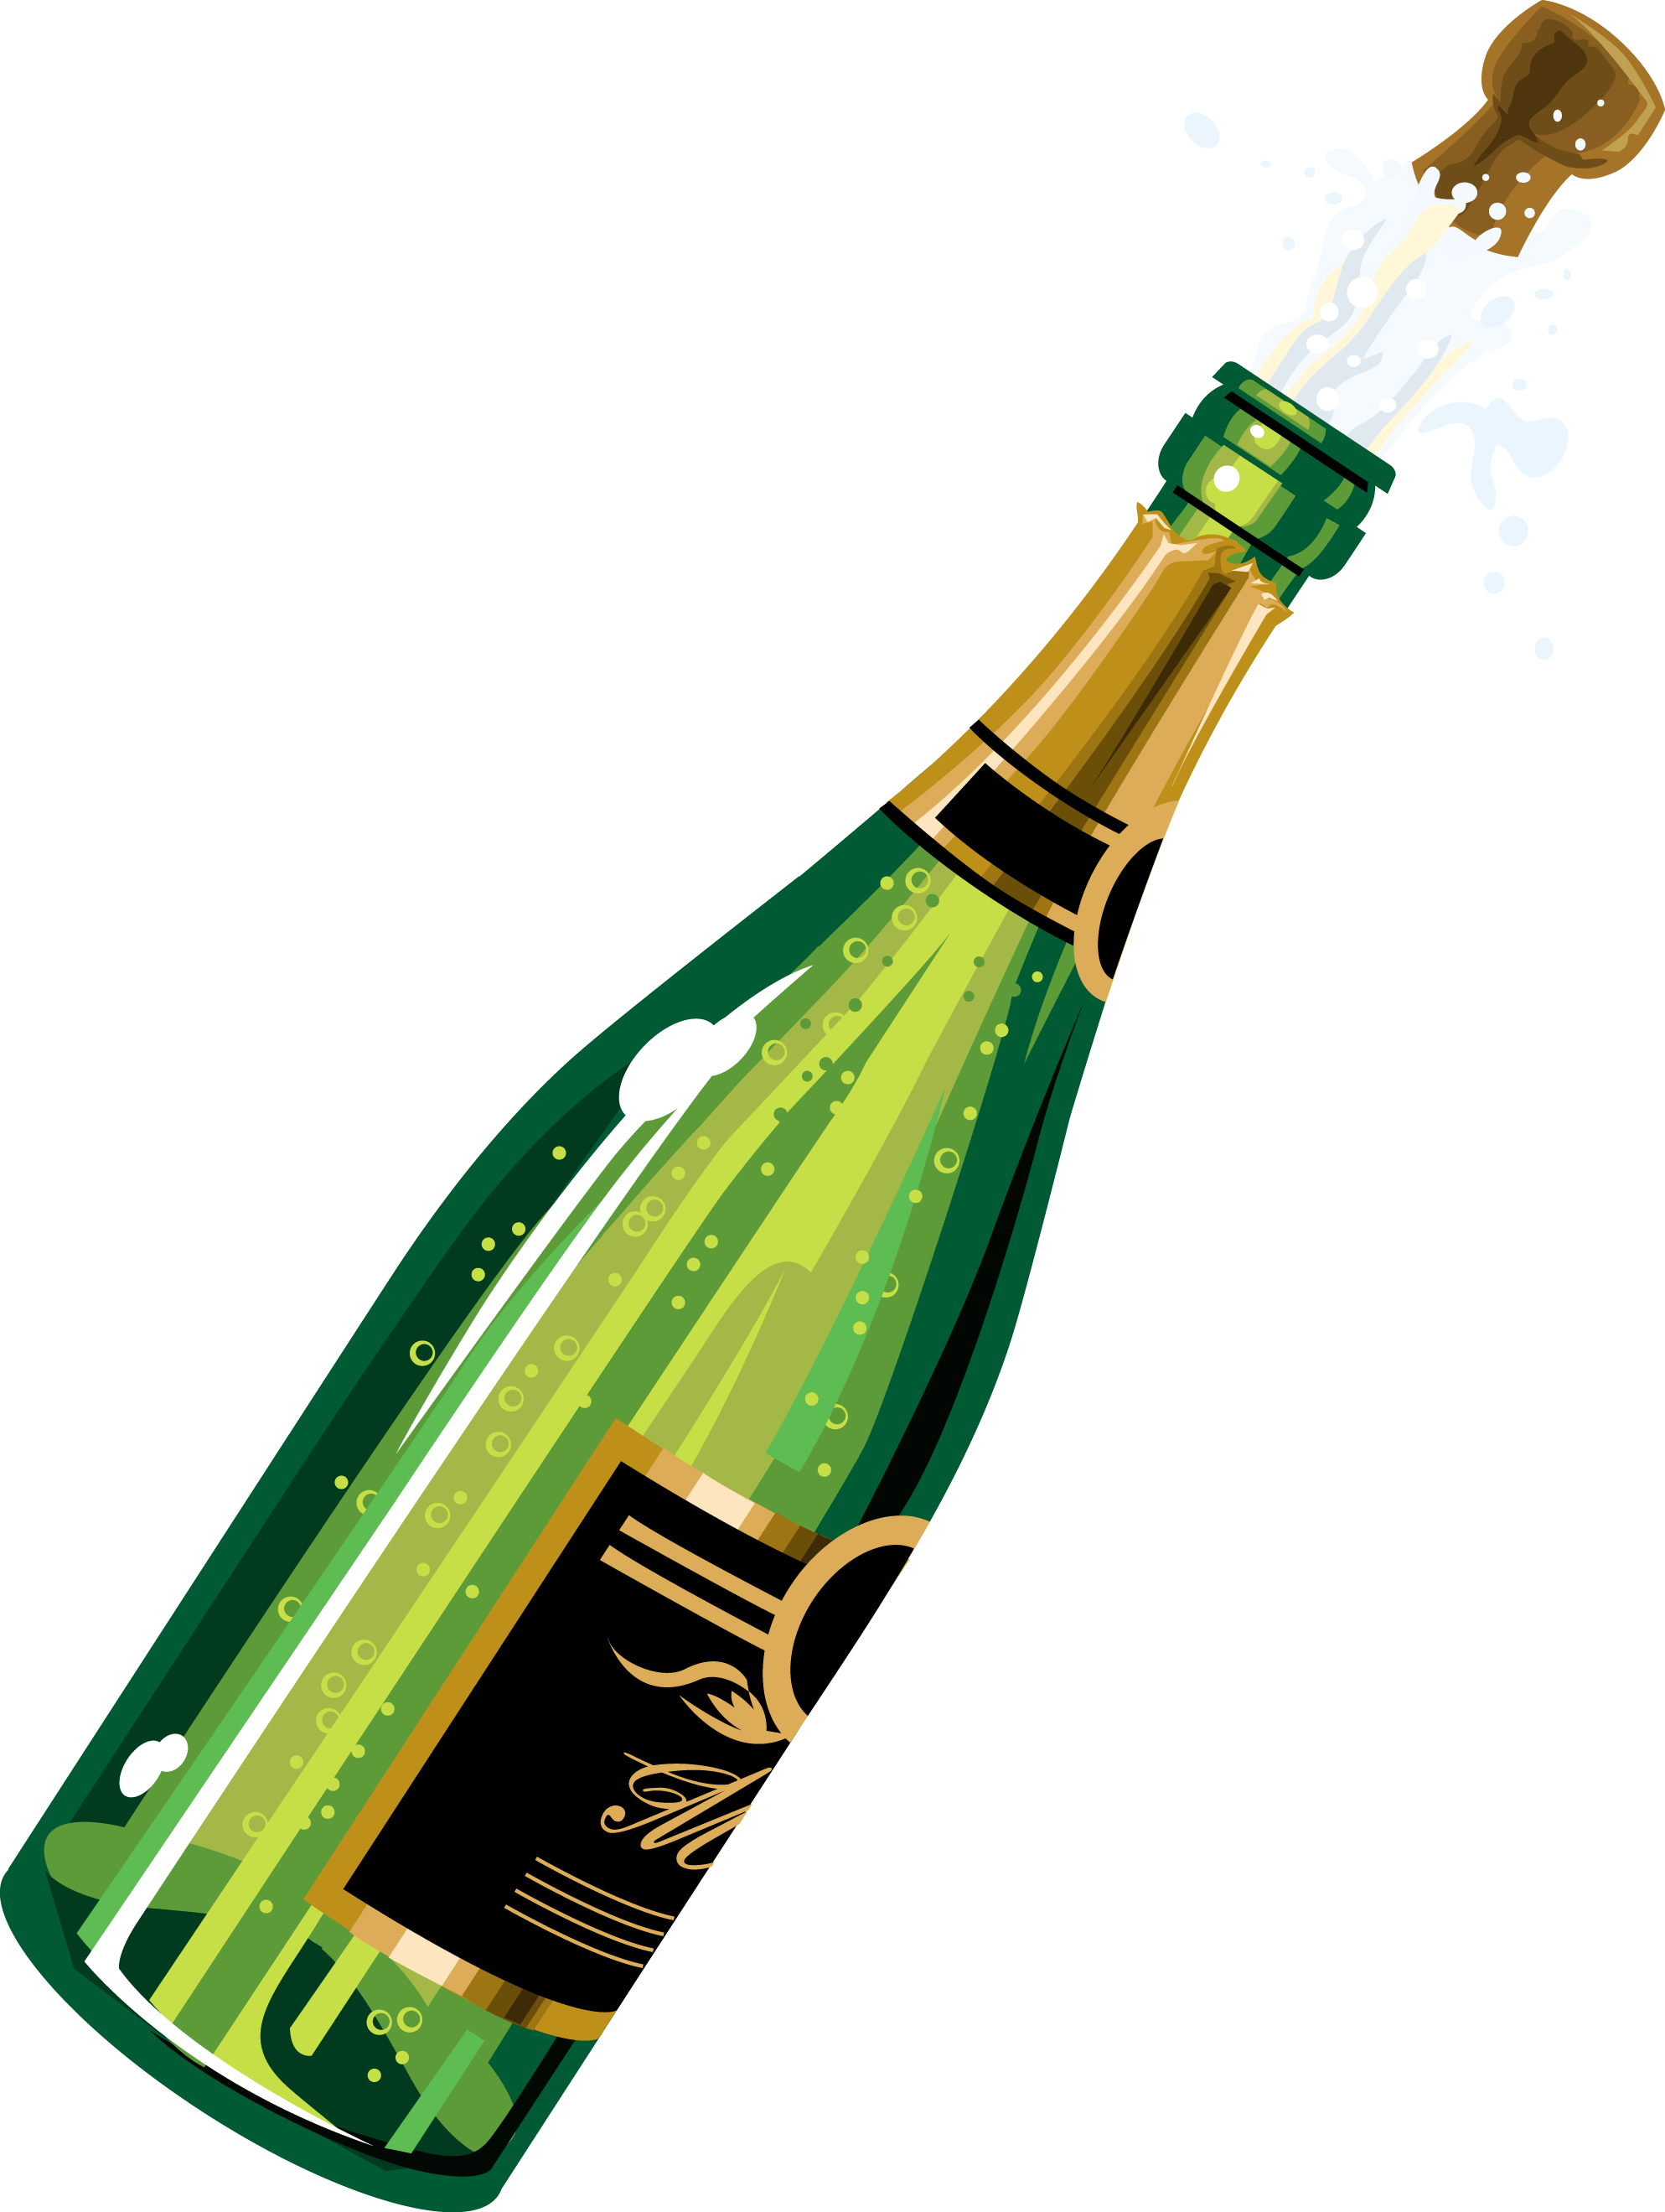 Champagne Bottle Clipart. Cha